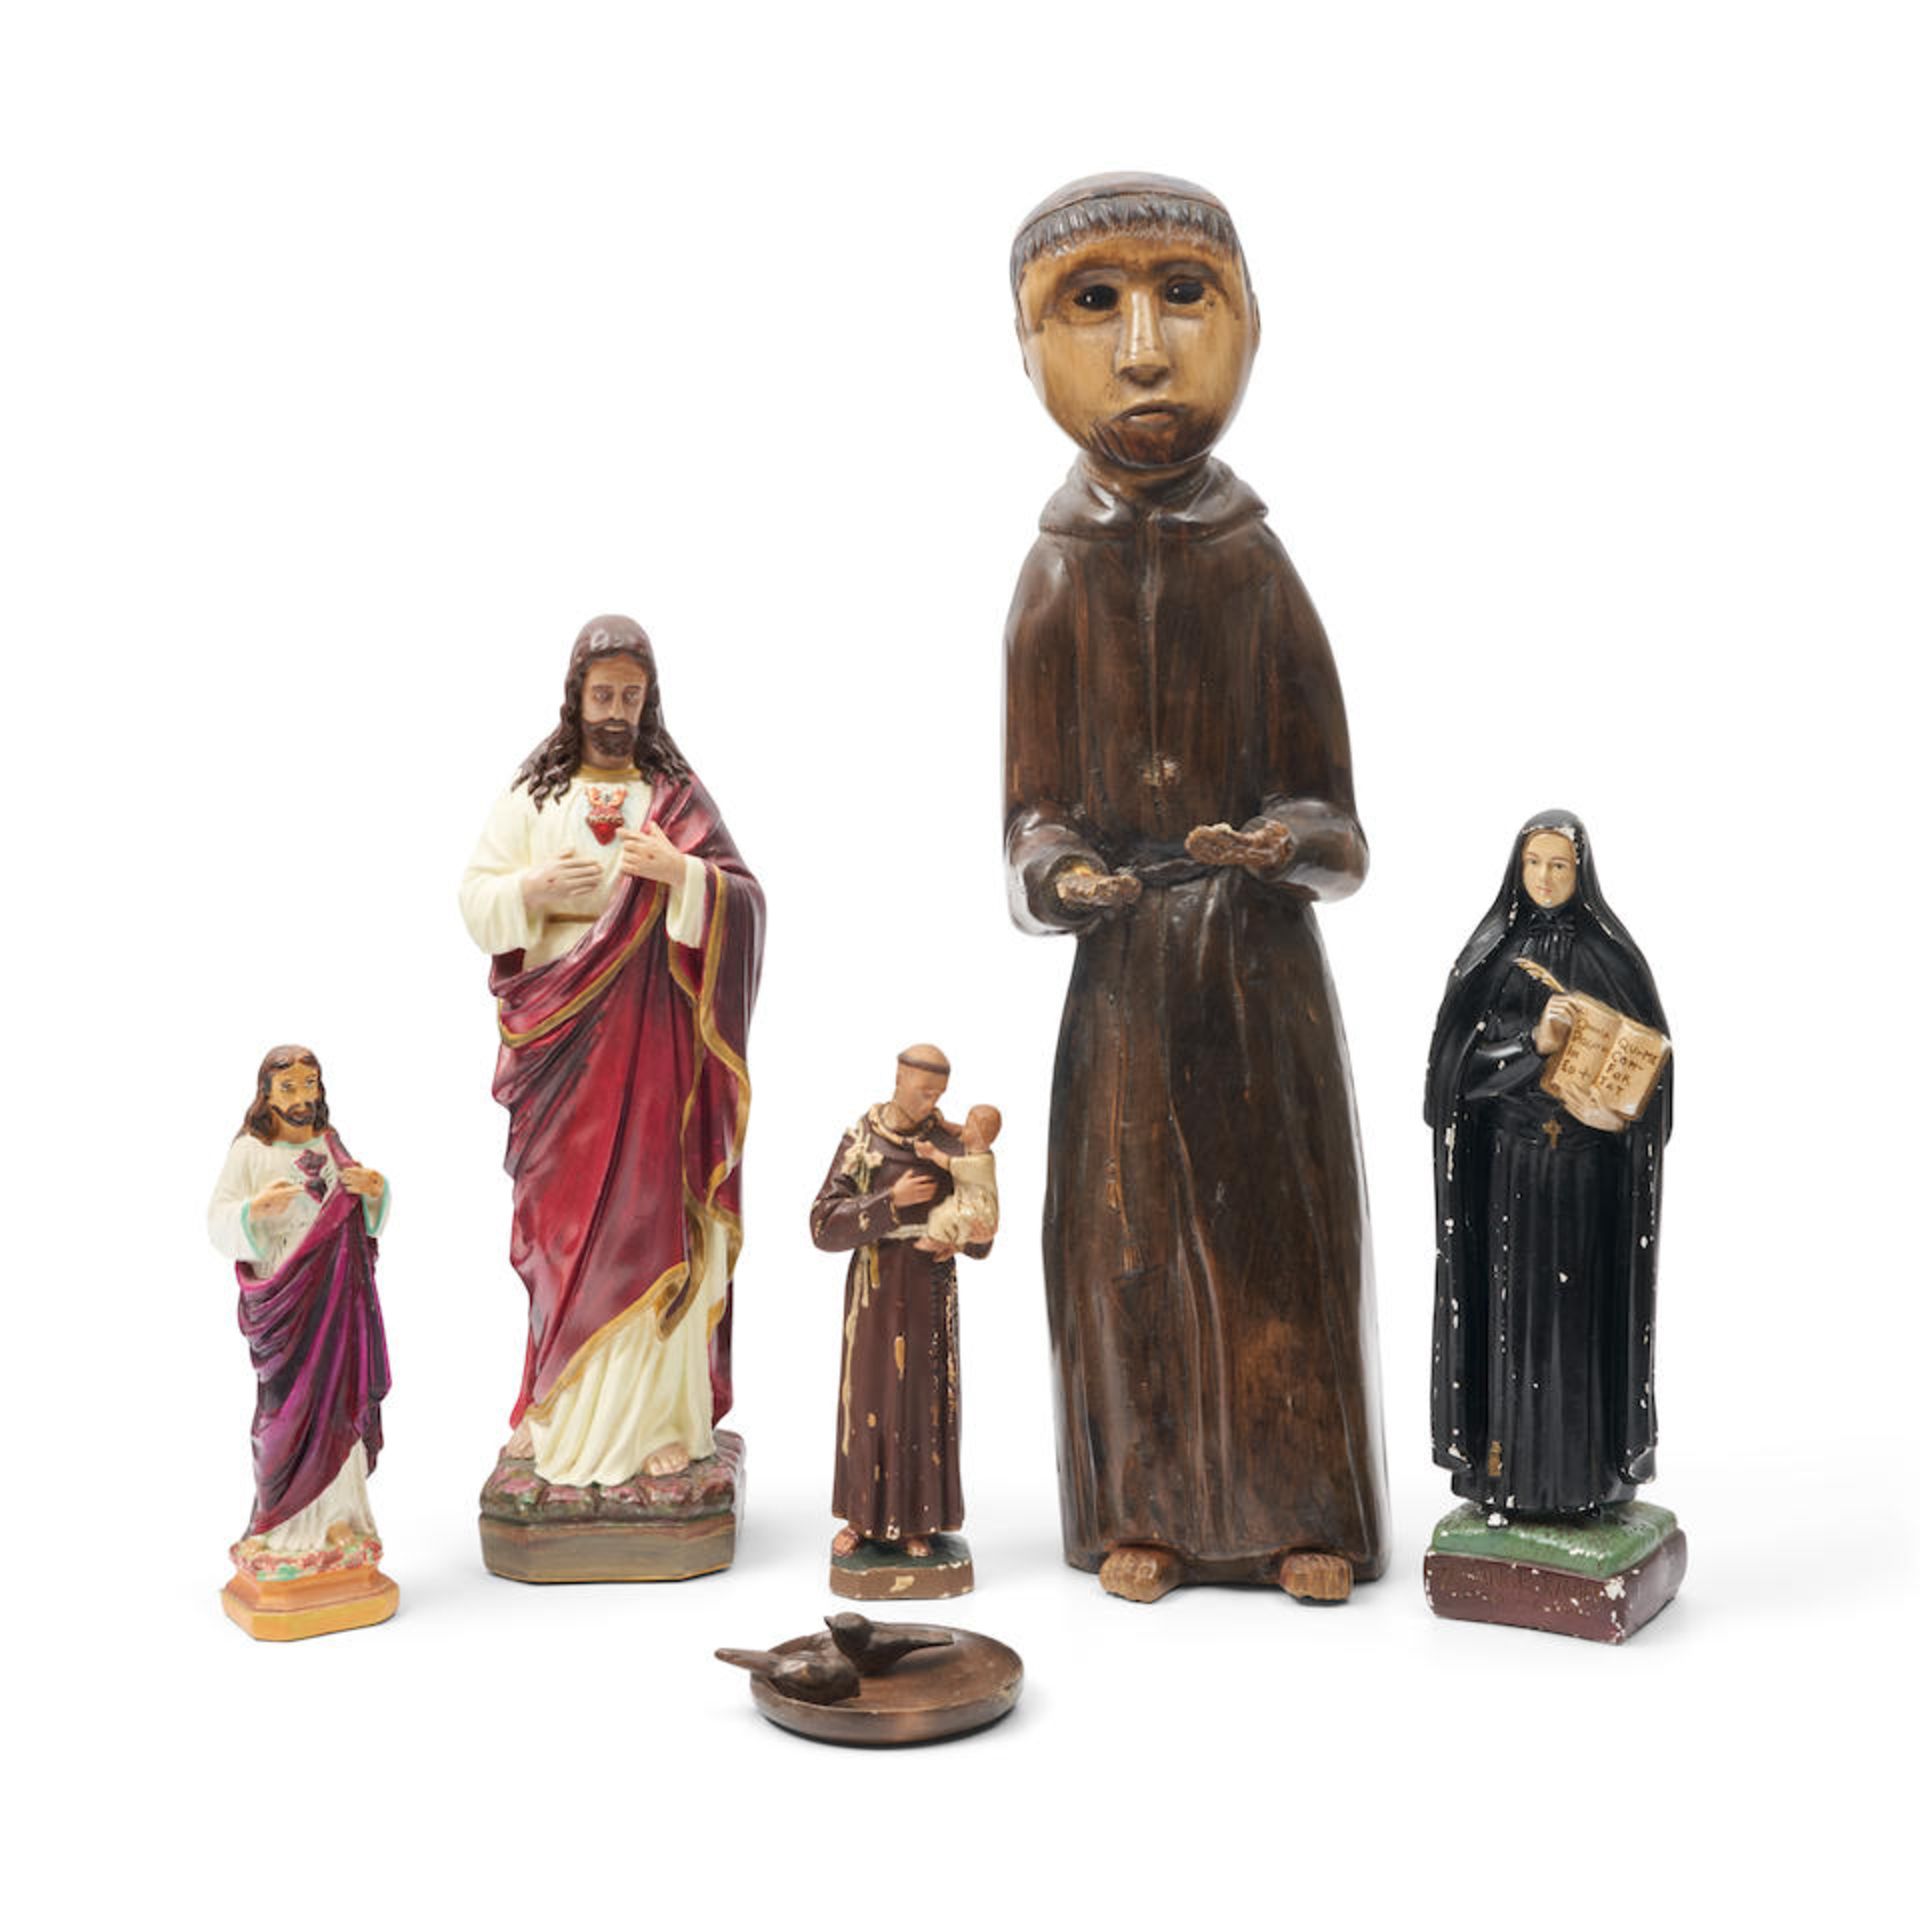 Group of Religious Chalkware and Wooden Statues